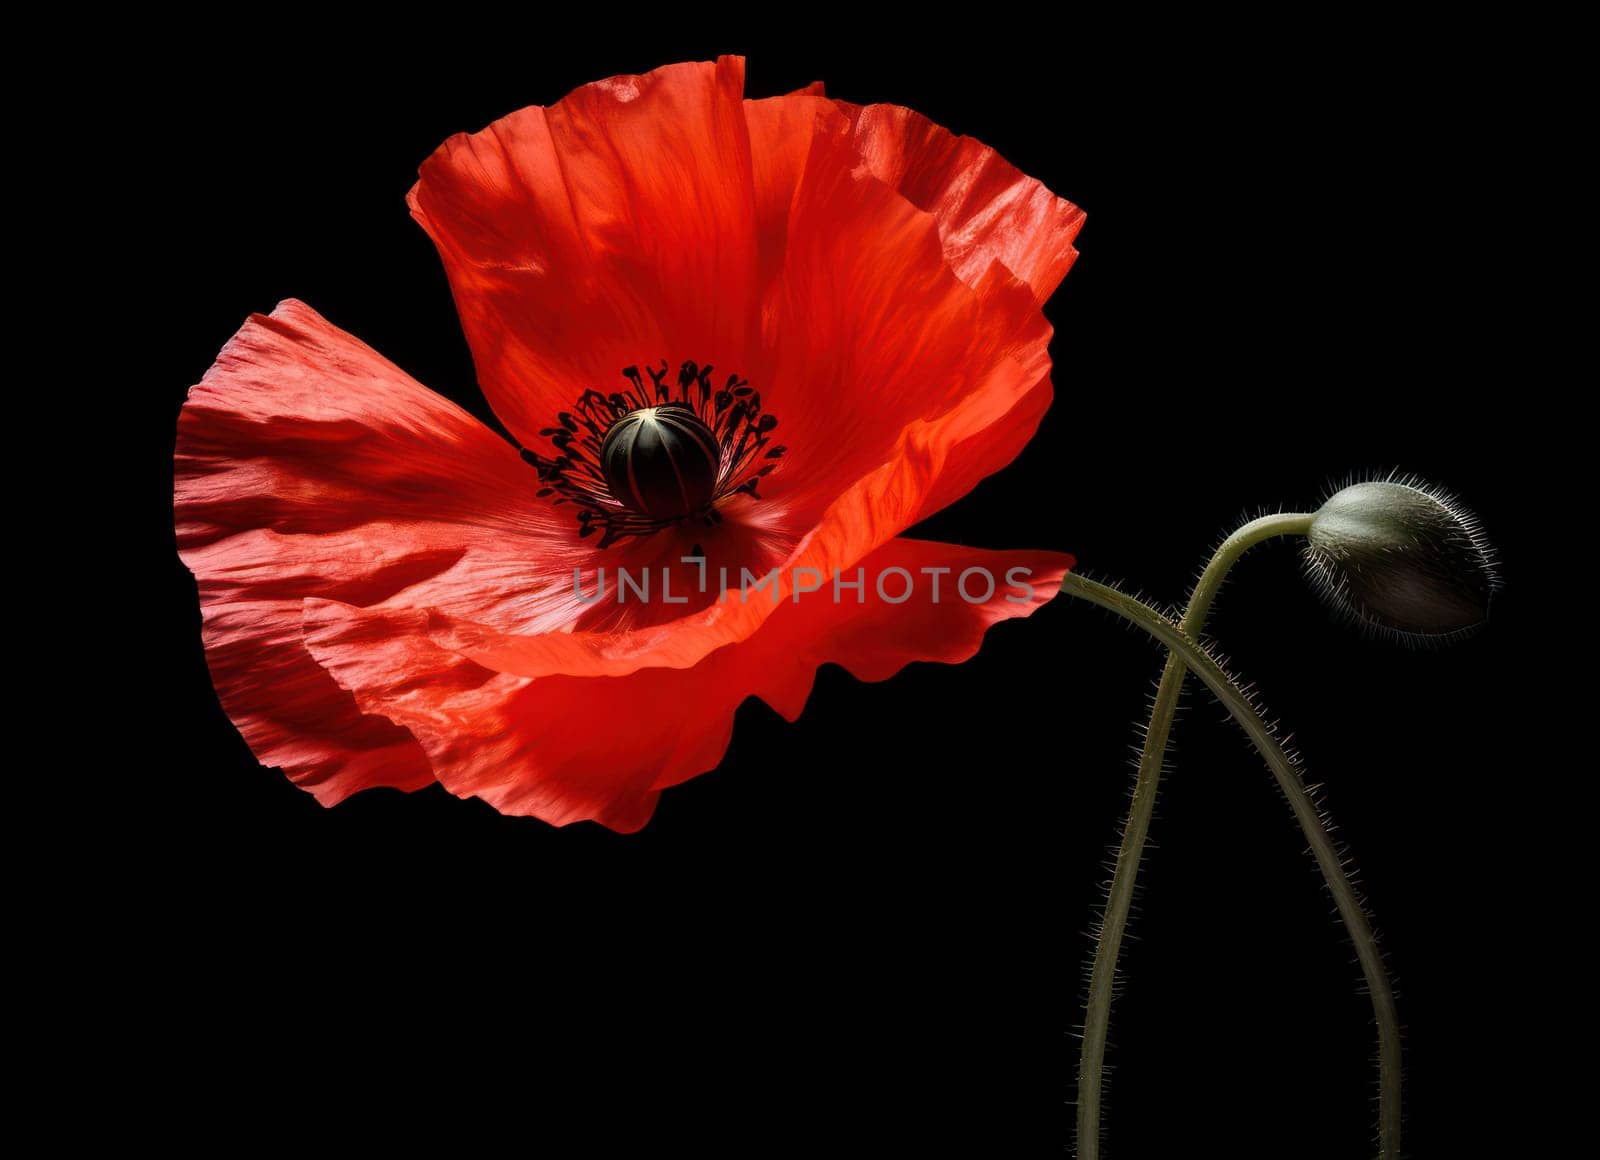 Blooming Beauty: A Vibrant Red Poppy Flower, Symbol of Nature's Splendor, in a Colorful Summer Garden by Vichizh